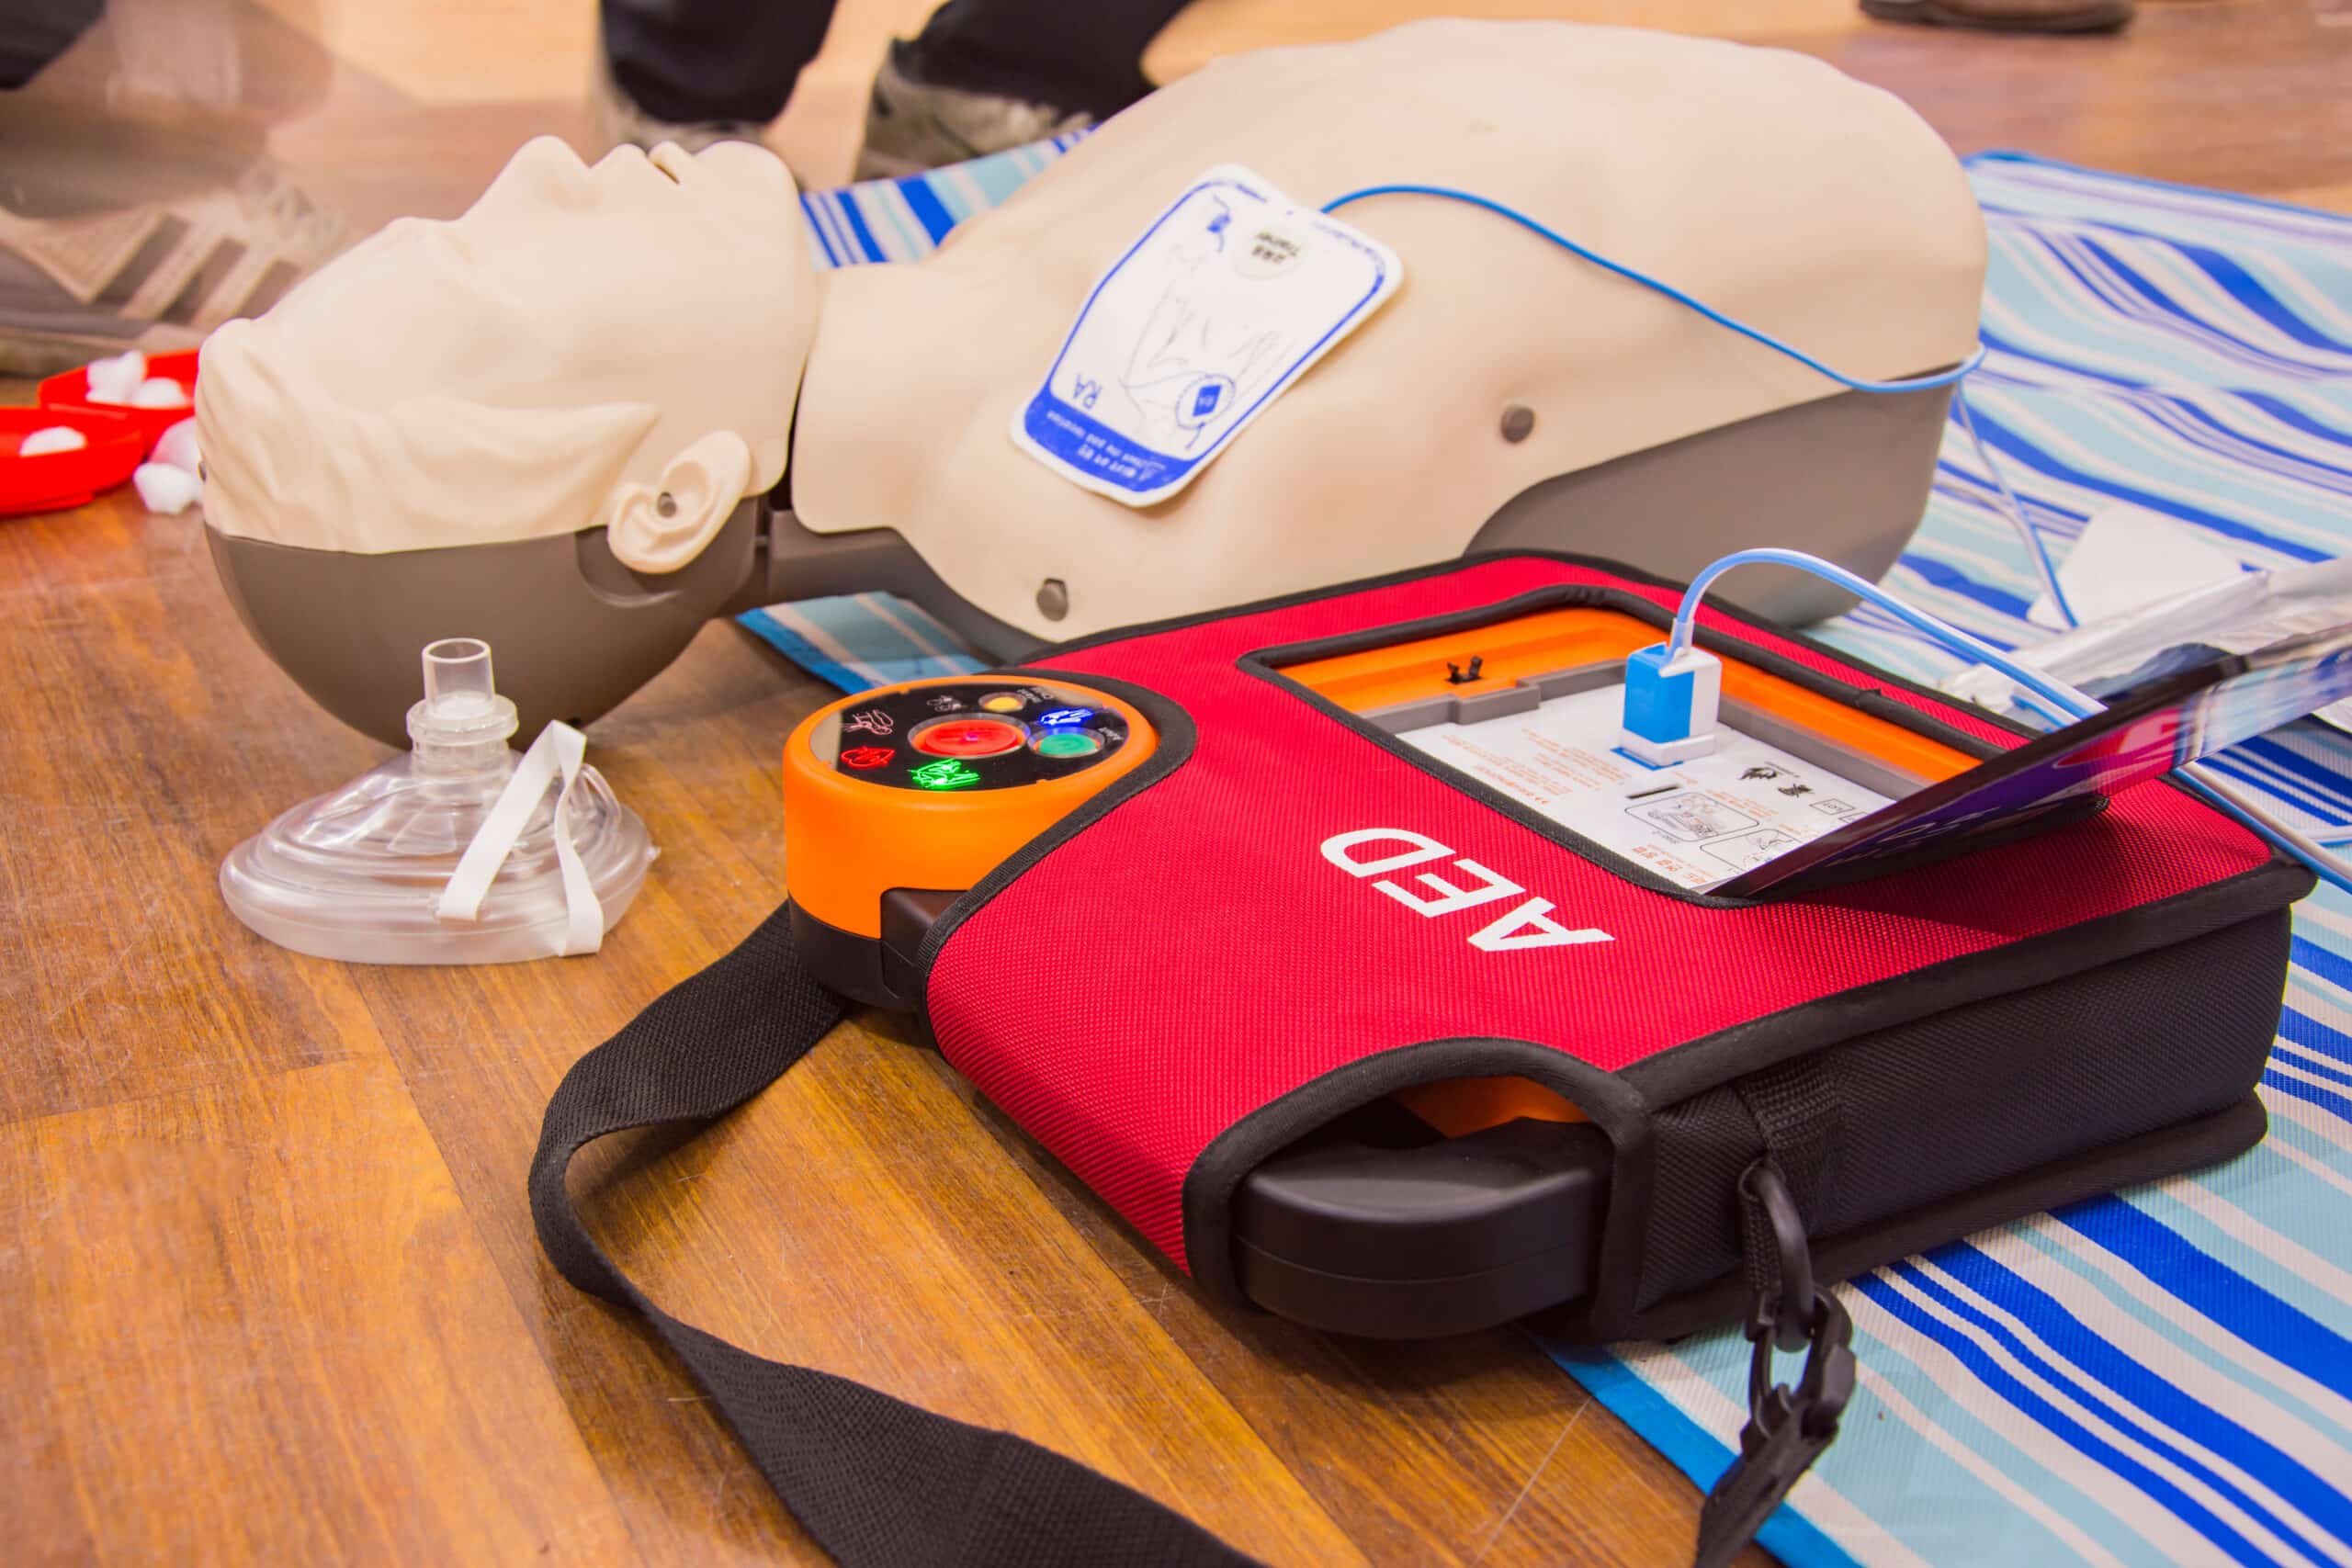 AEDs and CPR